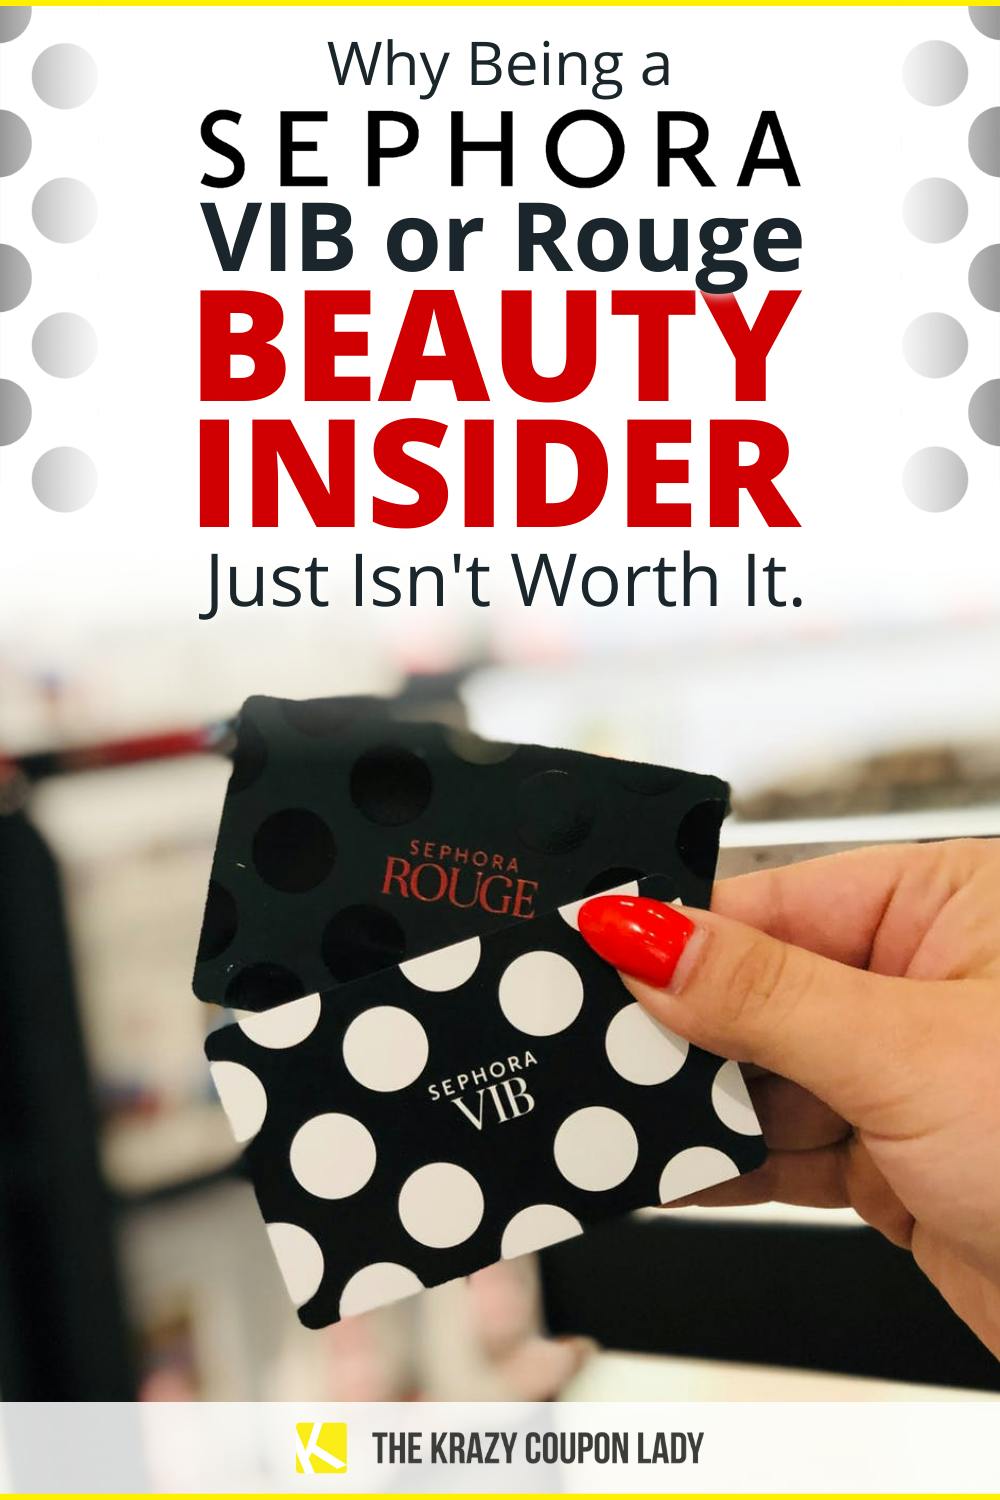 Why You Don't Really Need to Be a Sephora VIB or Rouge Beauty Insider